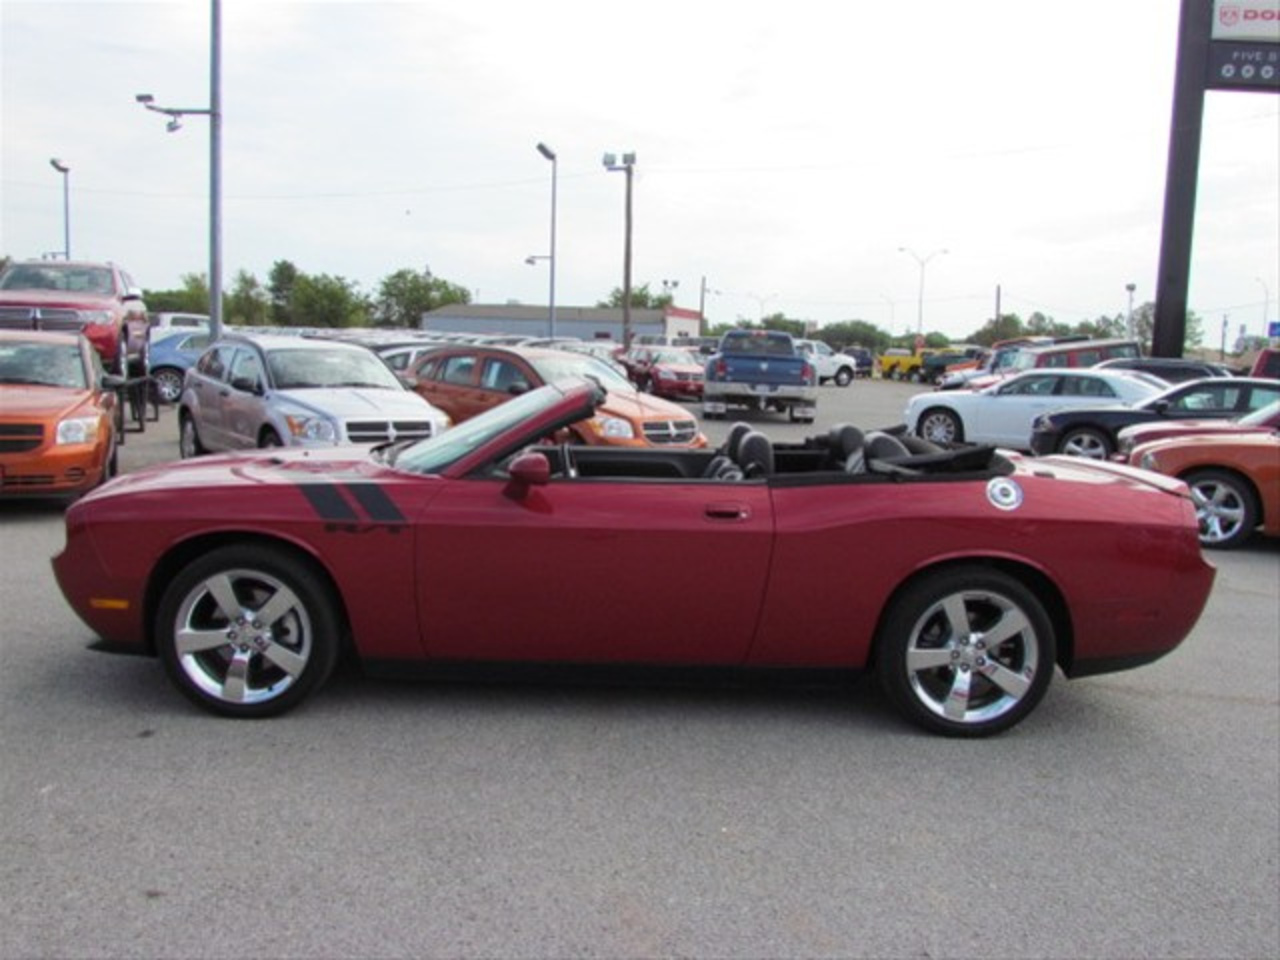 2010 Dodge Challenger RT convertible | Flickr - Photo Sharing!